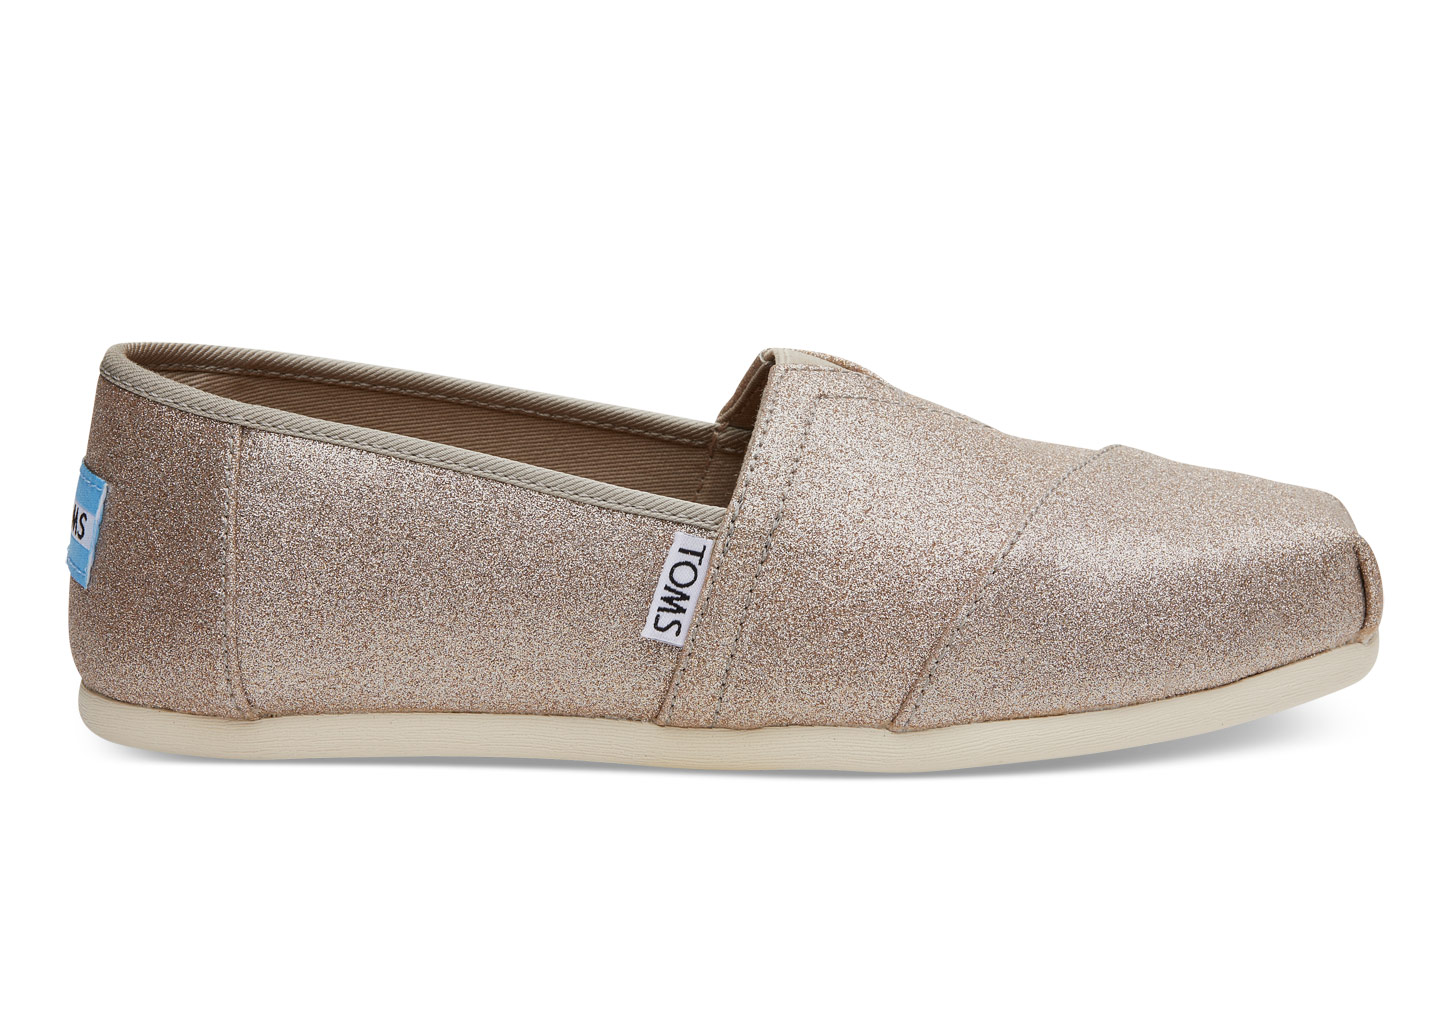 Shoes by Toms: A must-have for the women’s shoe cabinet